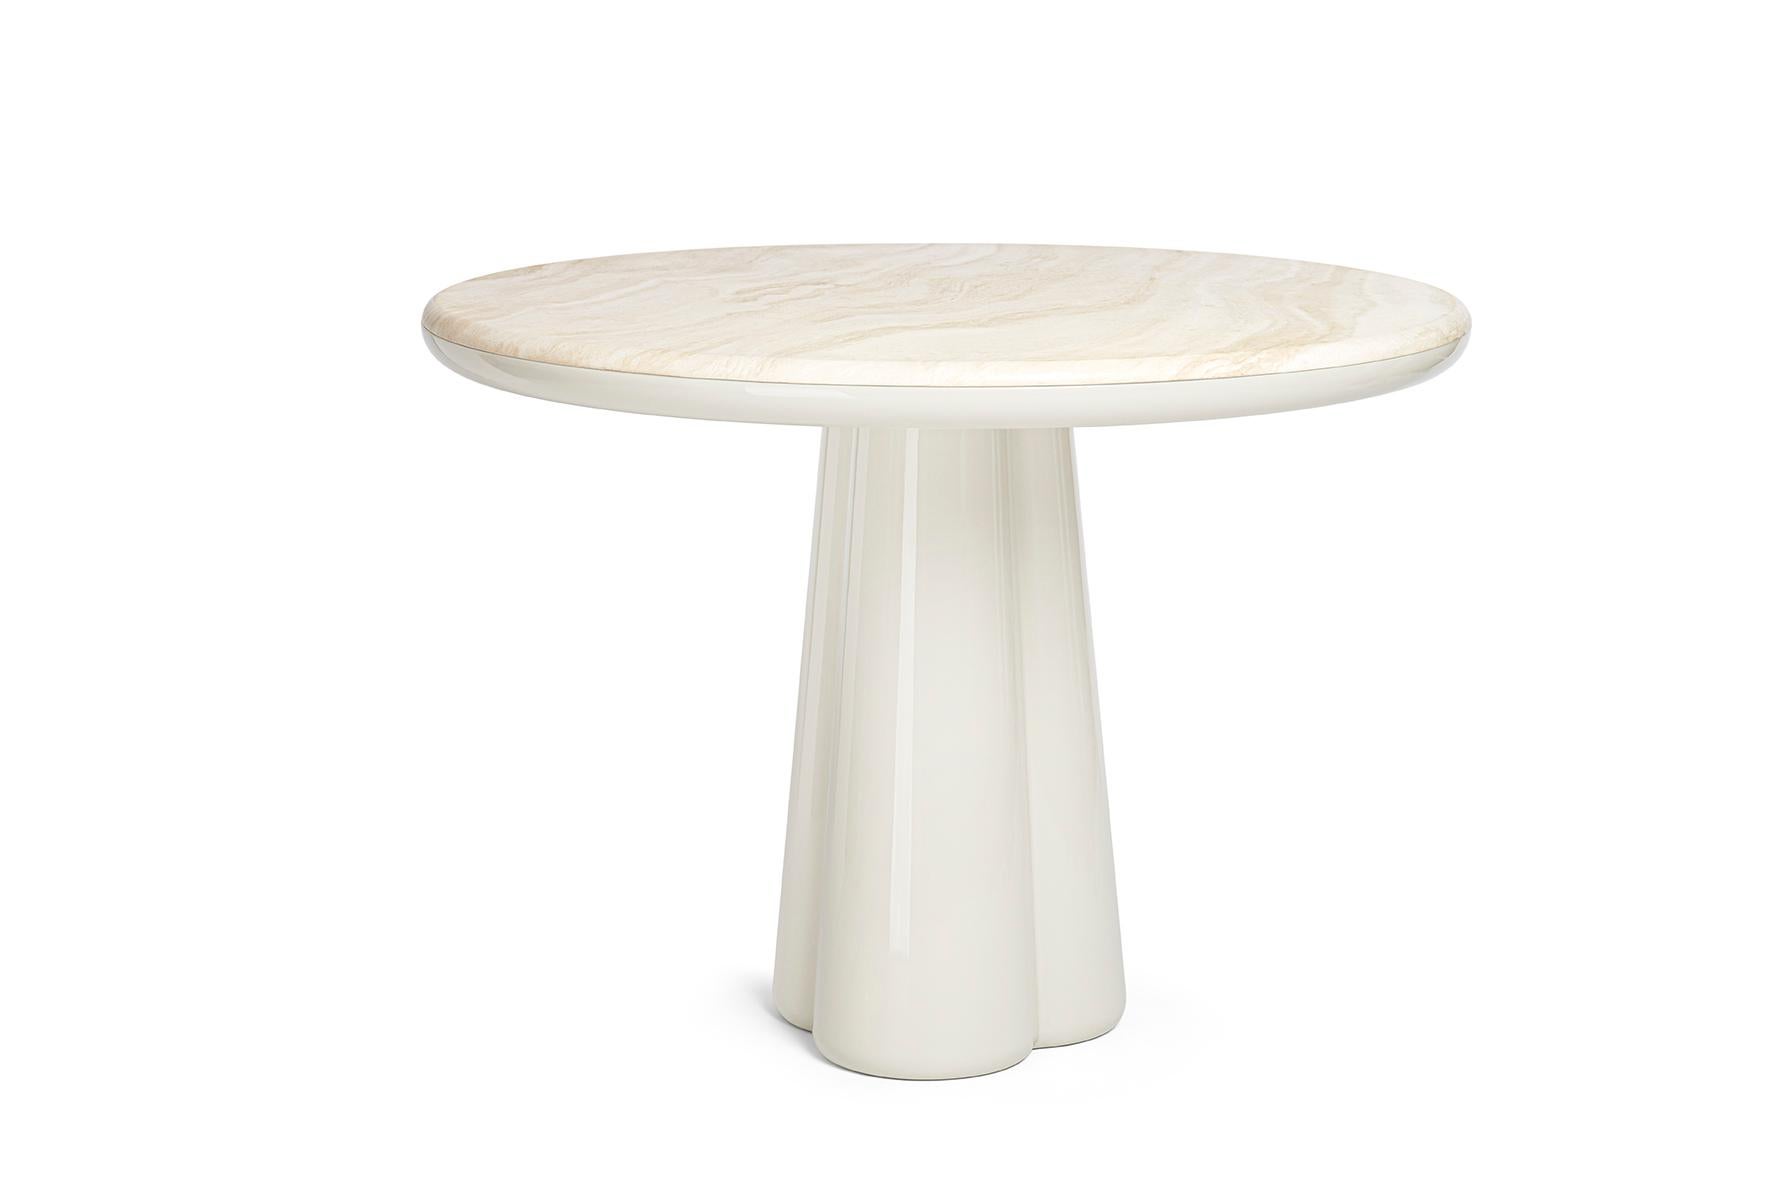 21st Cent. Elena Salmistraro Table Polyurethane Red Levanto Marble Top Mat Base For Sale 4